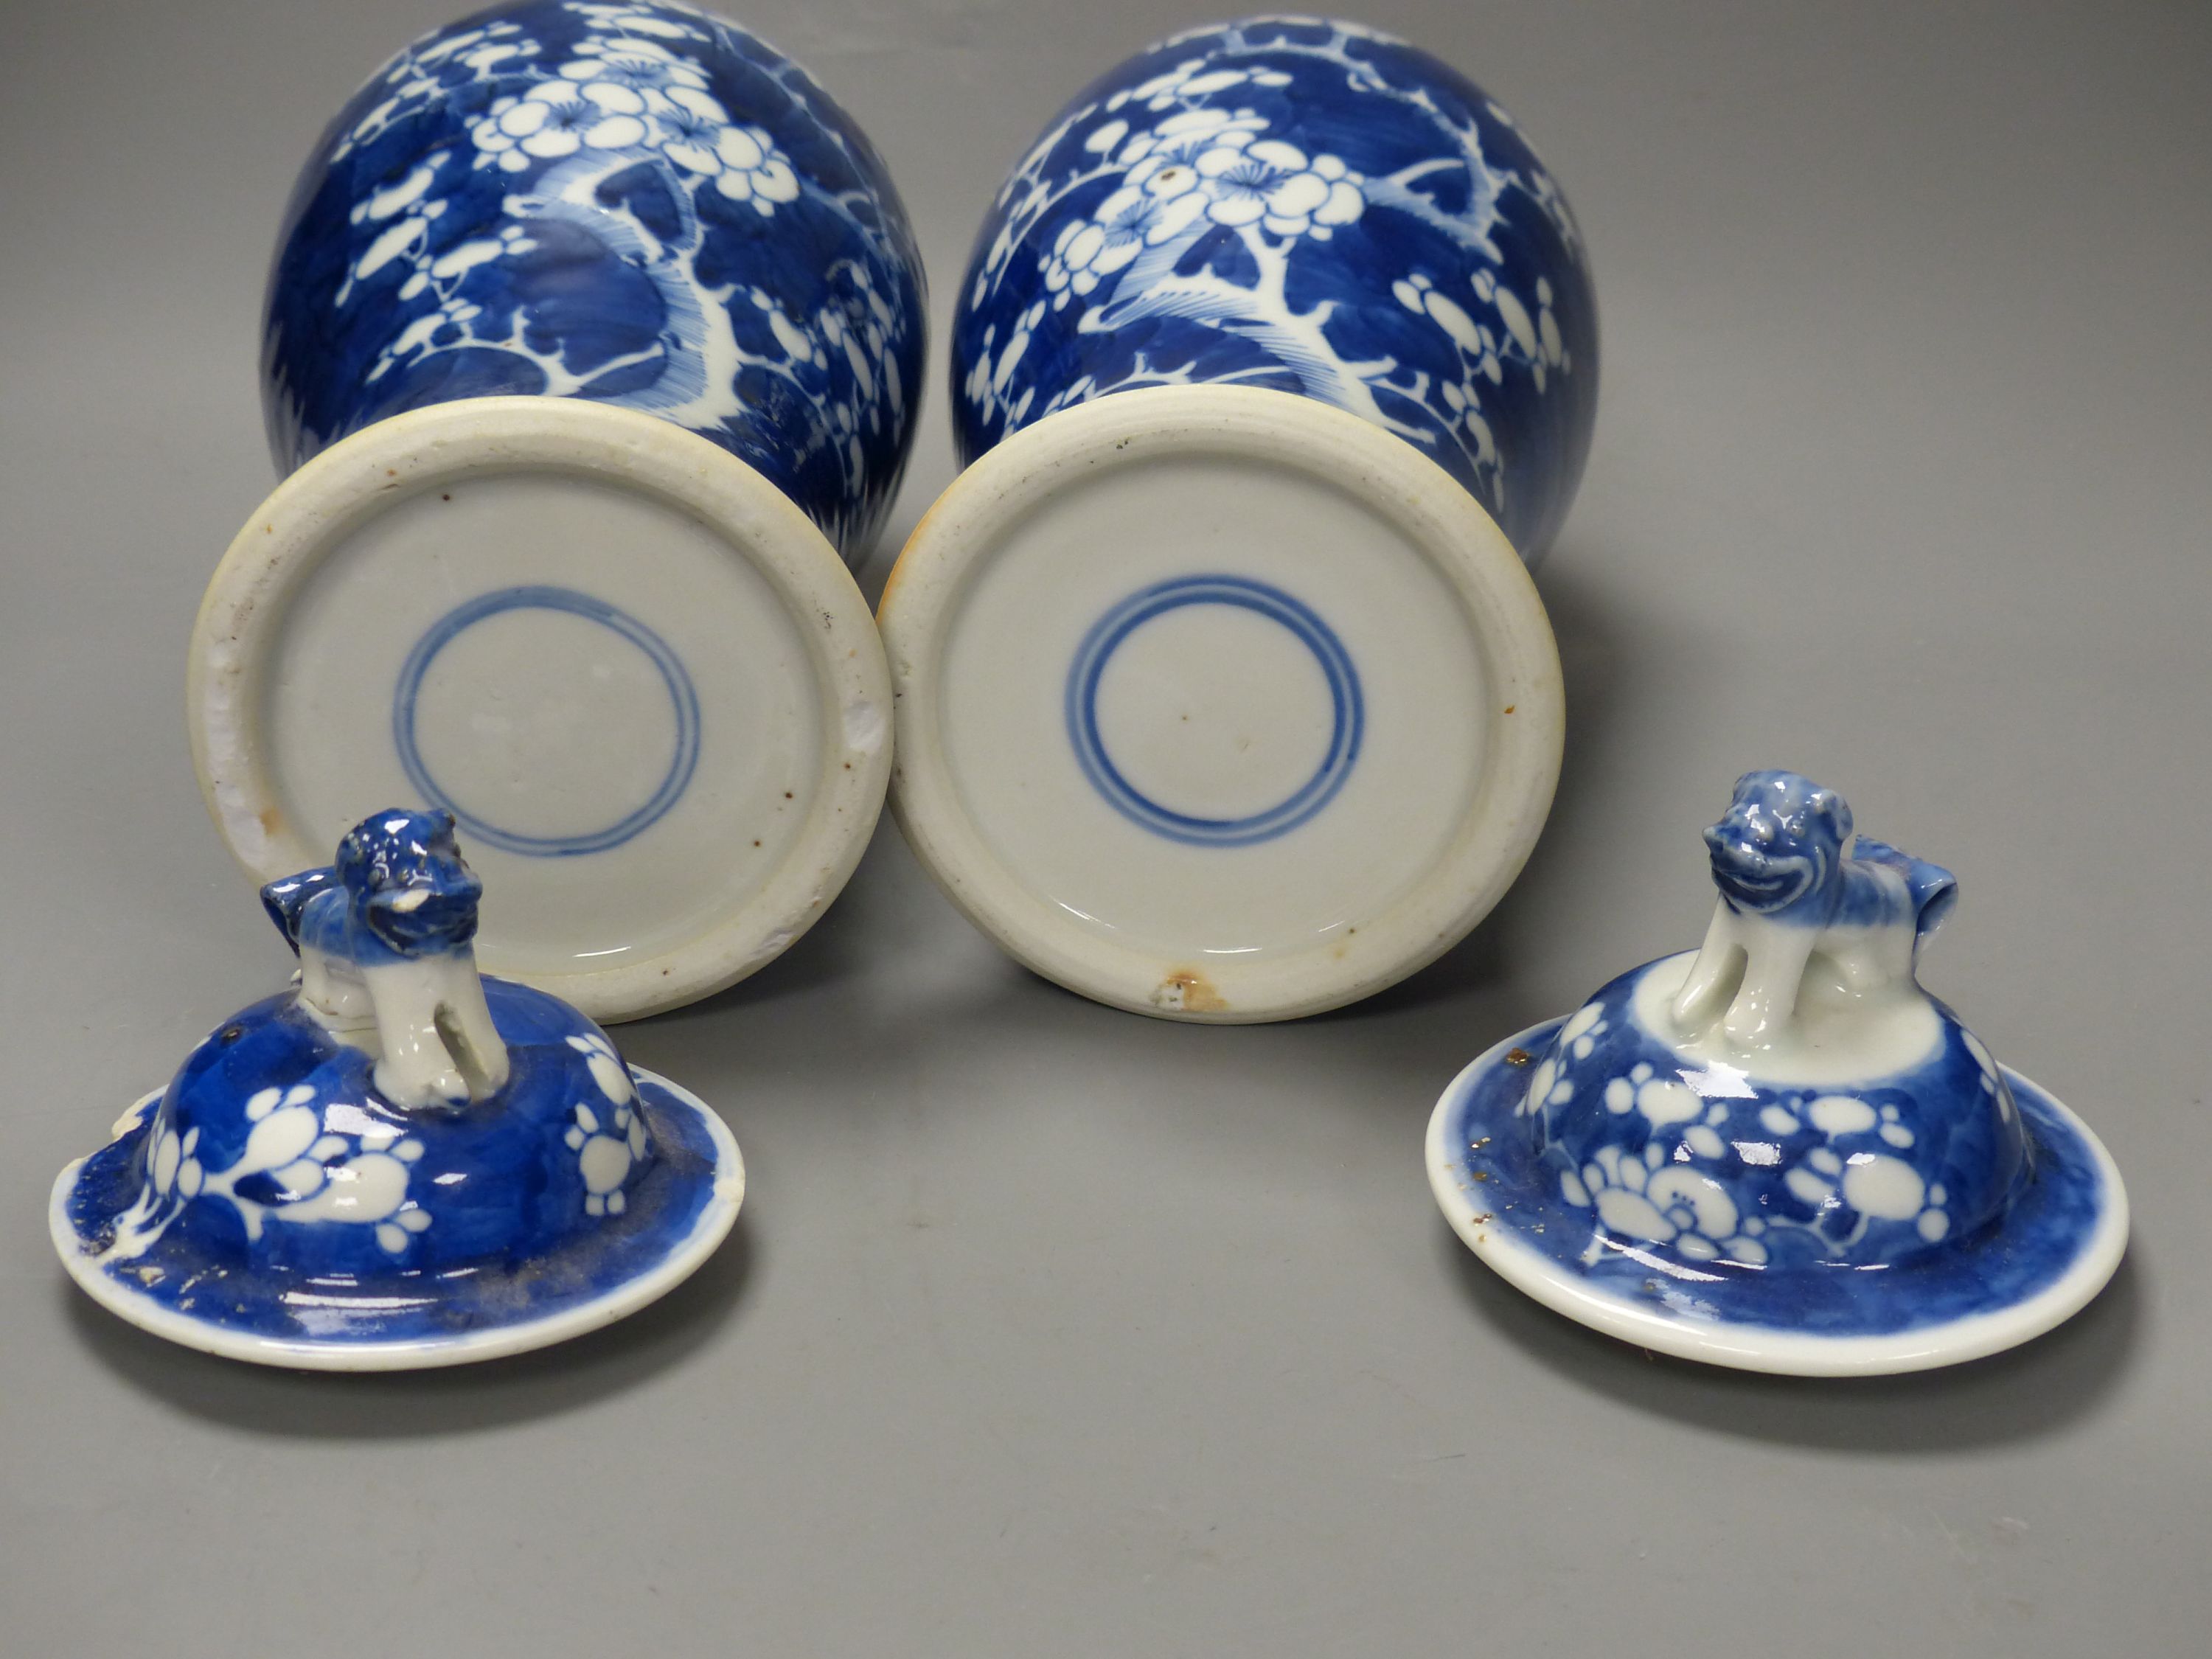 A pair of Chinese blue and white prunus vases and covers, early 20th century, overall height 35cm